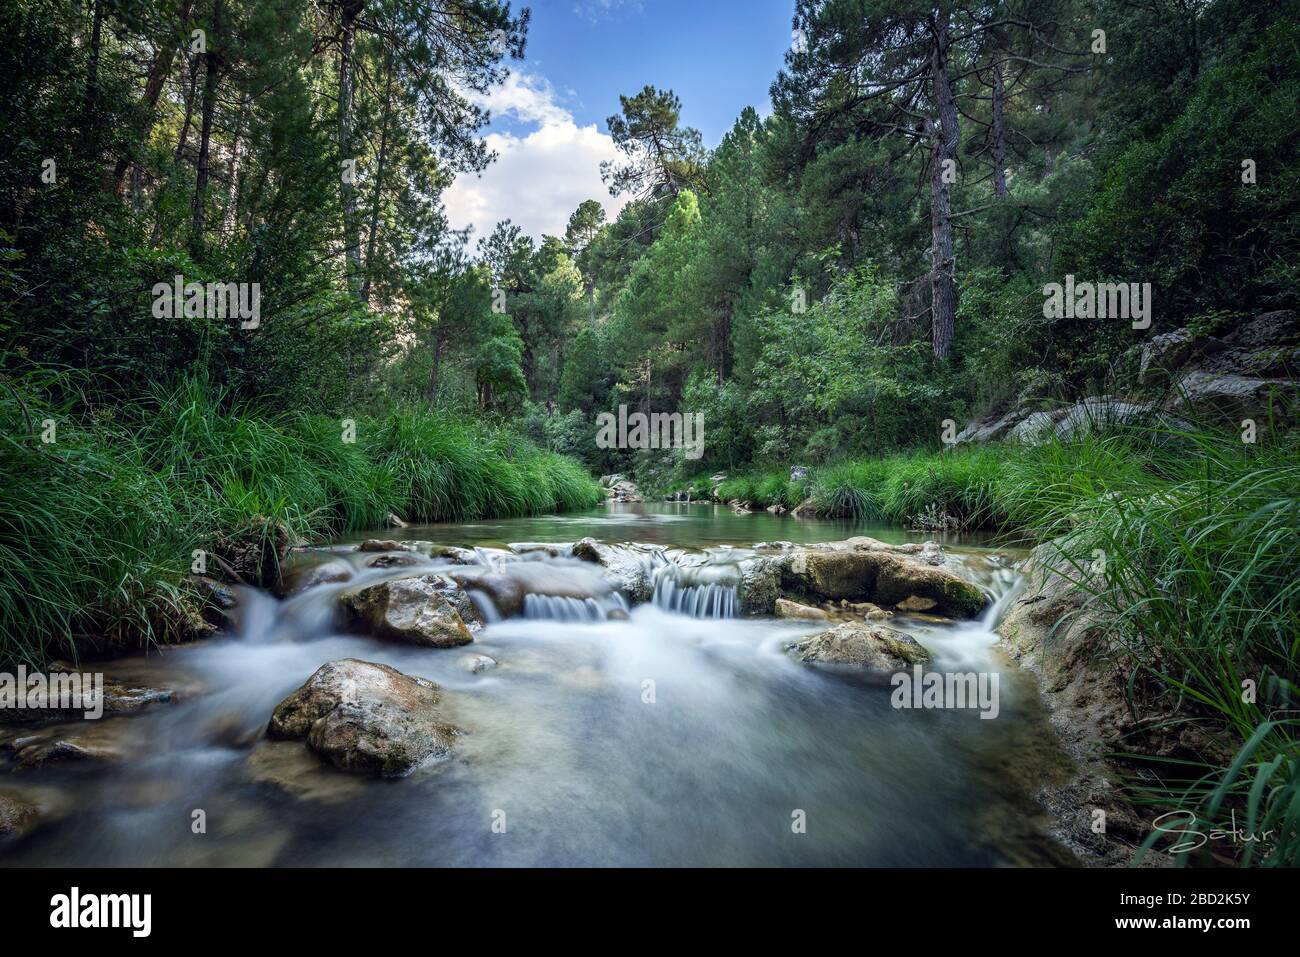 Beautiful river surrounded by green vegetation and a blue sky in the background Stock Photo